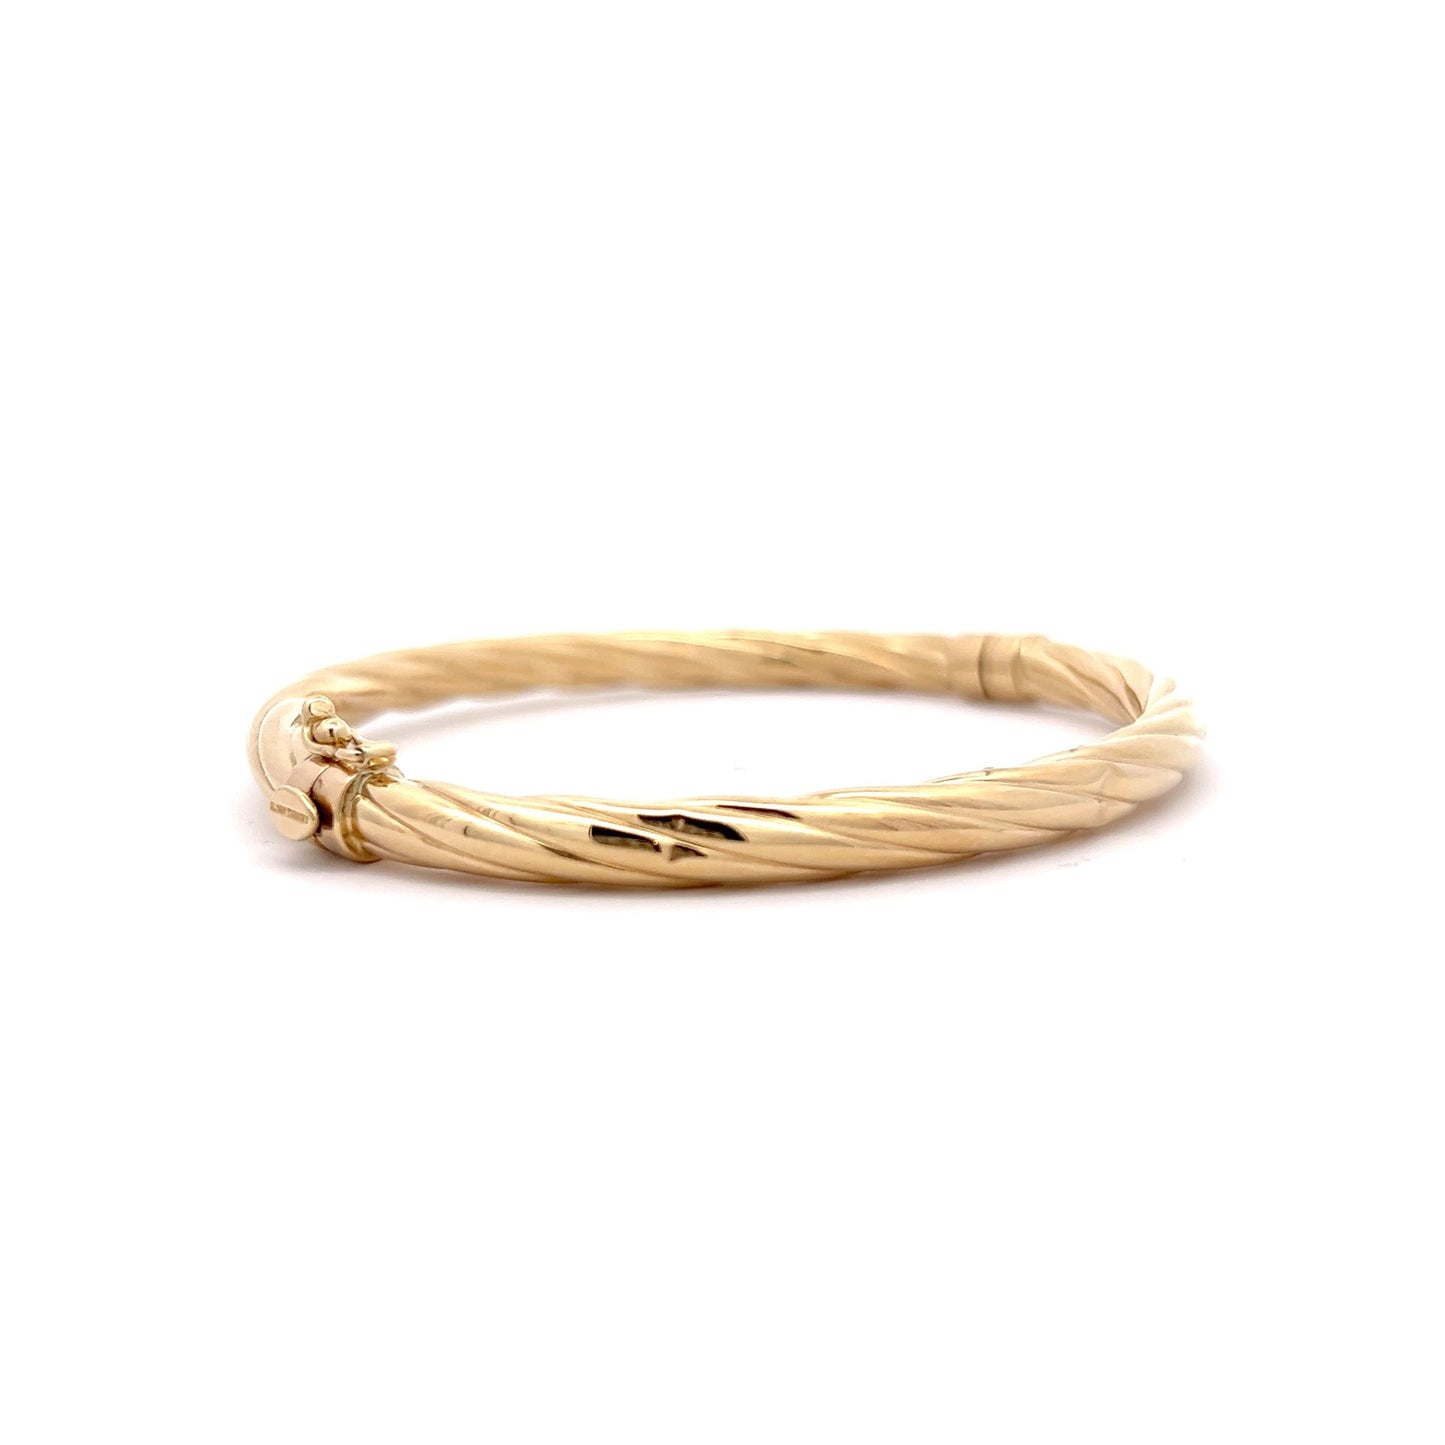 Twisted Rope Bangle Bracelet in 14k Yellow Gold